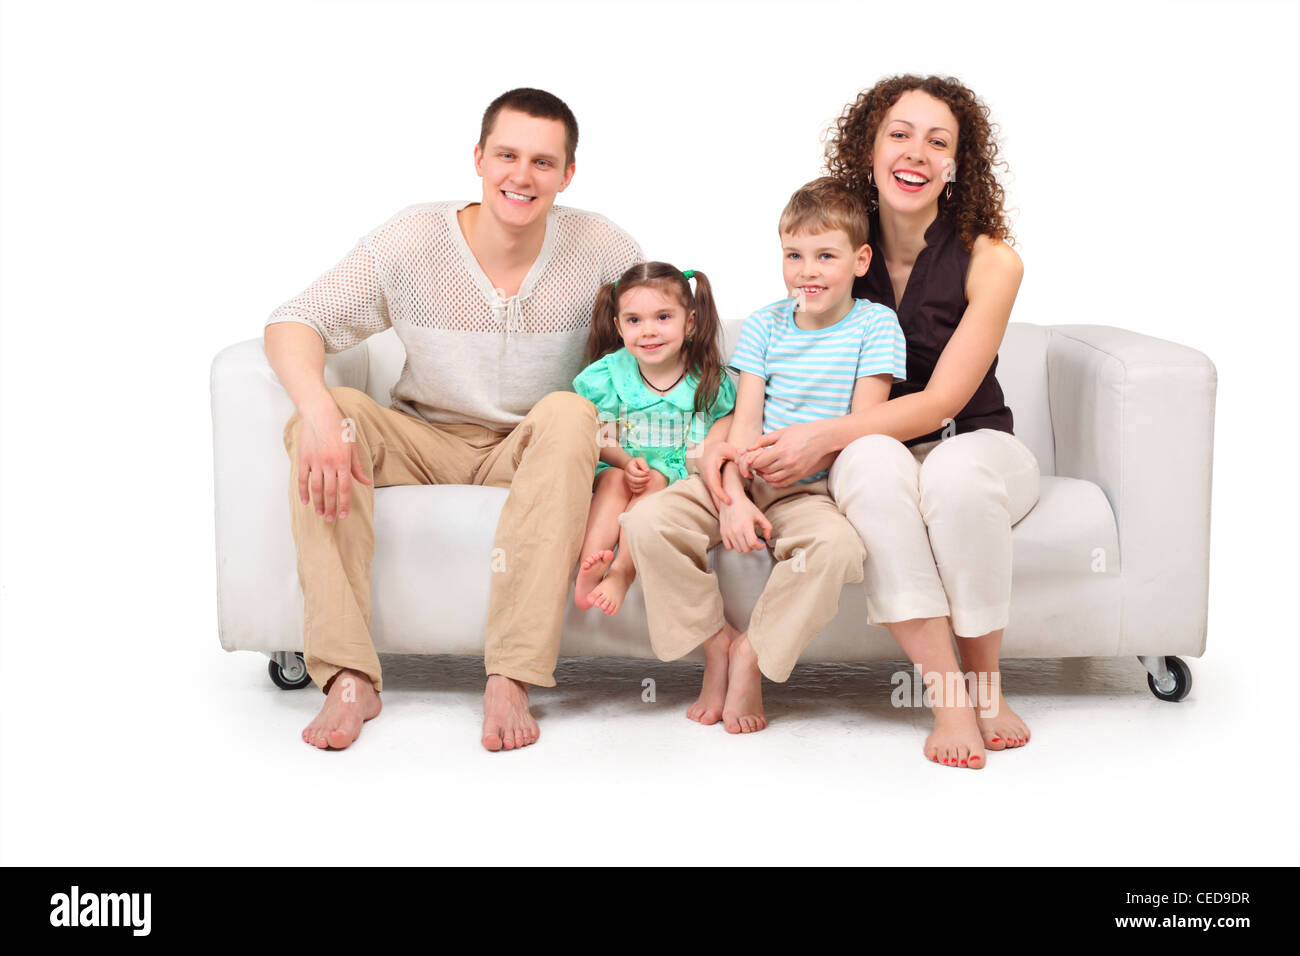 Family with two children sitting on white leather sofa Stock Photo